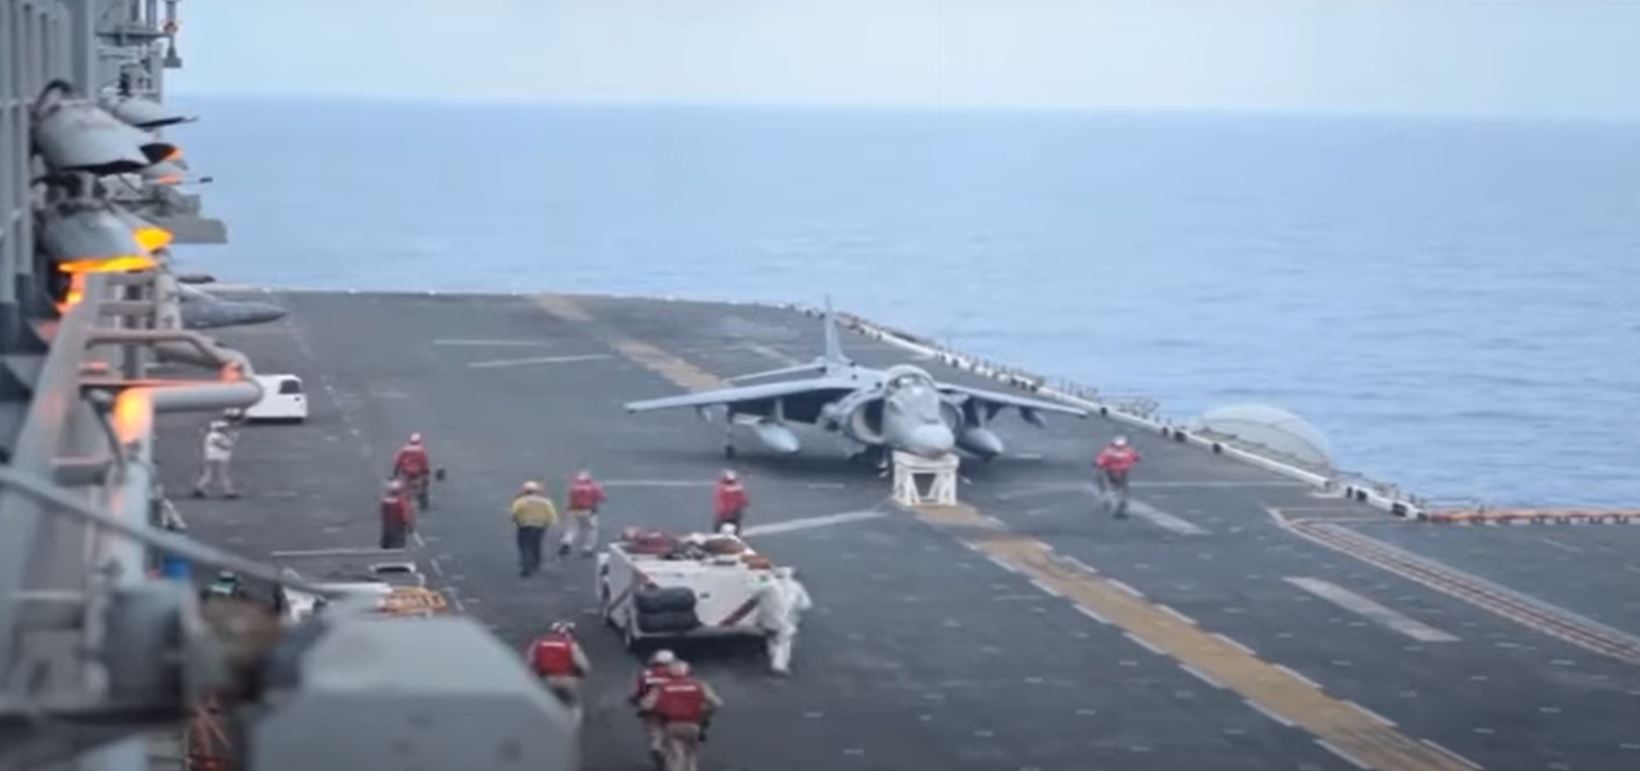 Meet Captain Mahoney, Who Landed A Harrier Precisely On A Stool 6